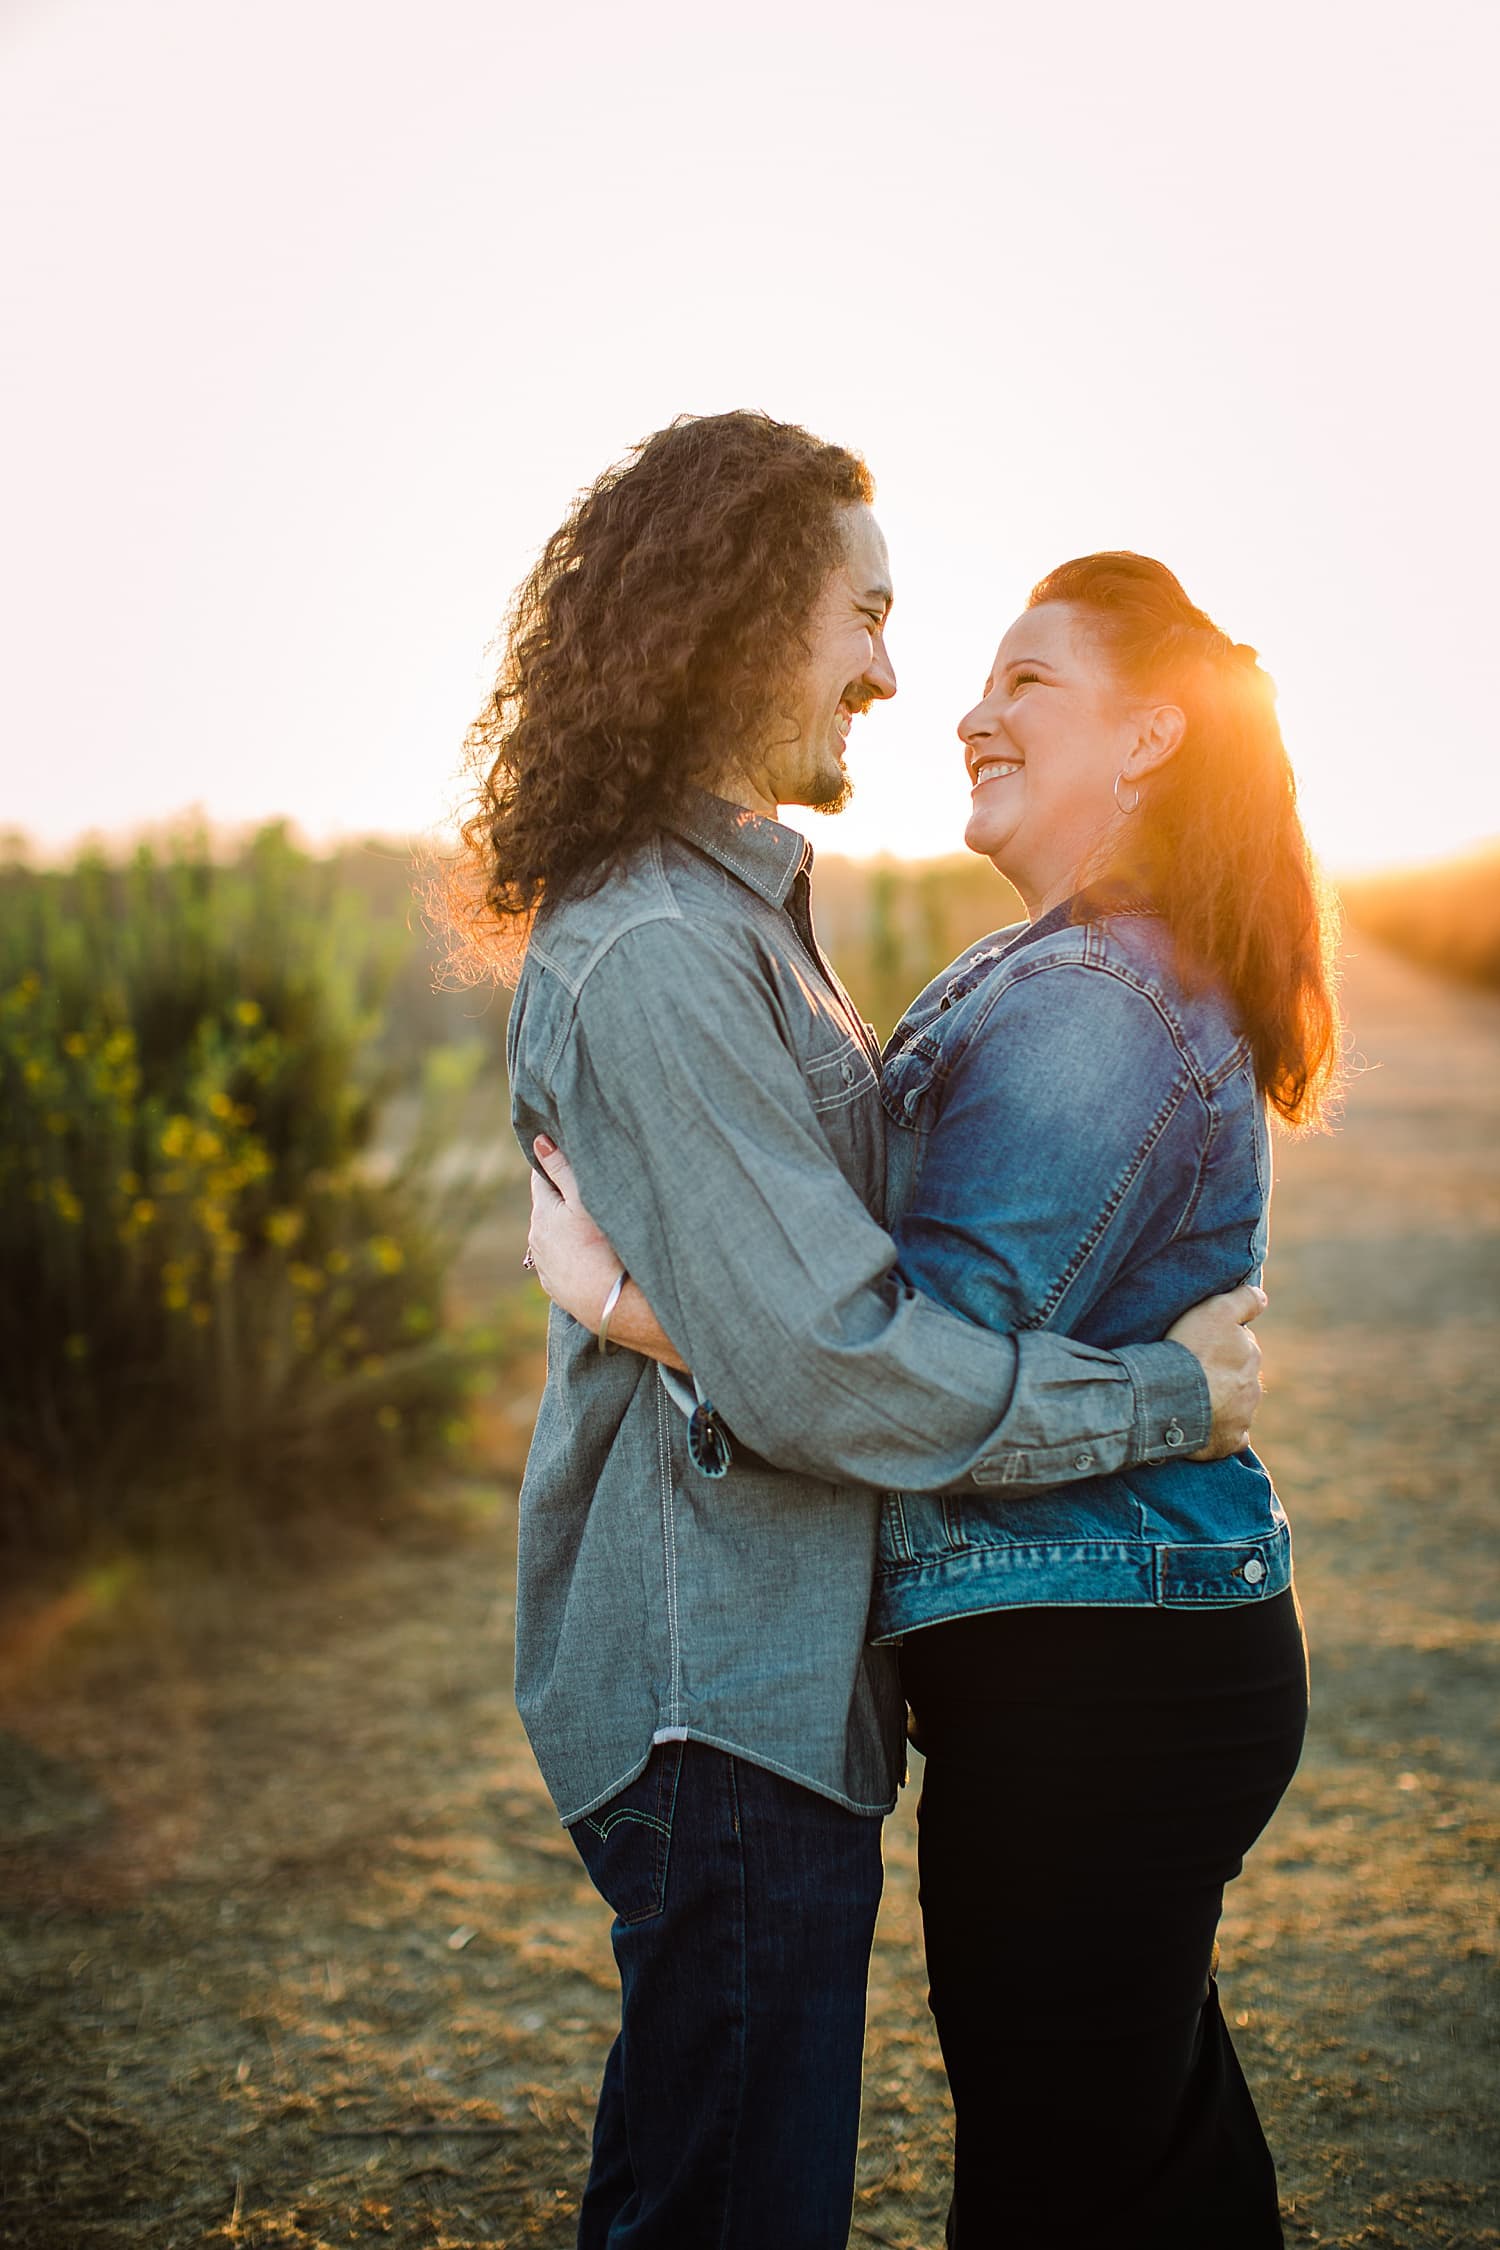 First things first, this Fairview Park sunrise engagement in Costa Mesa was so much fun!